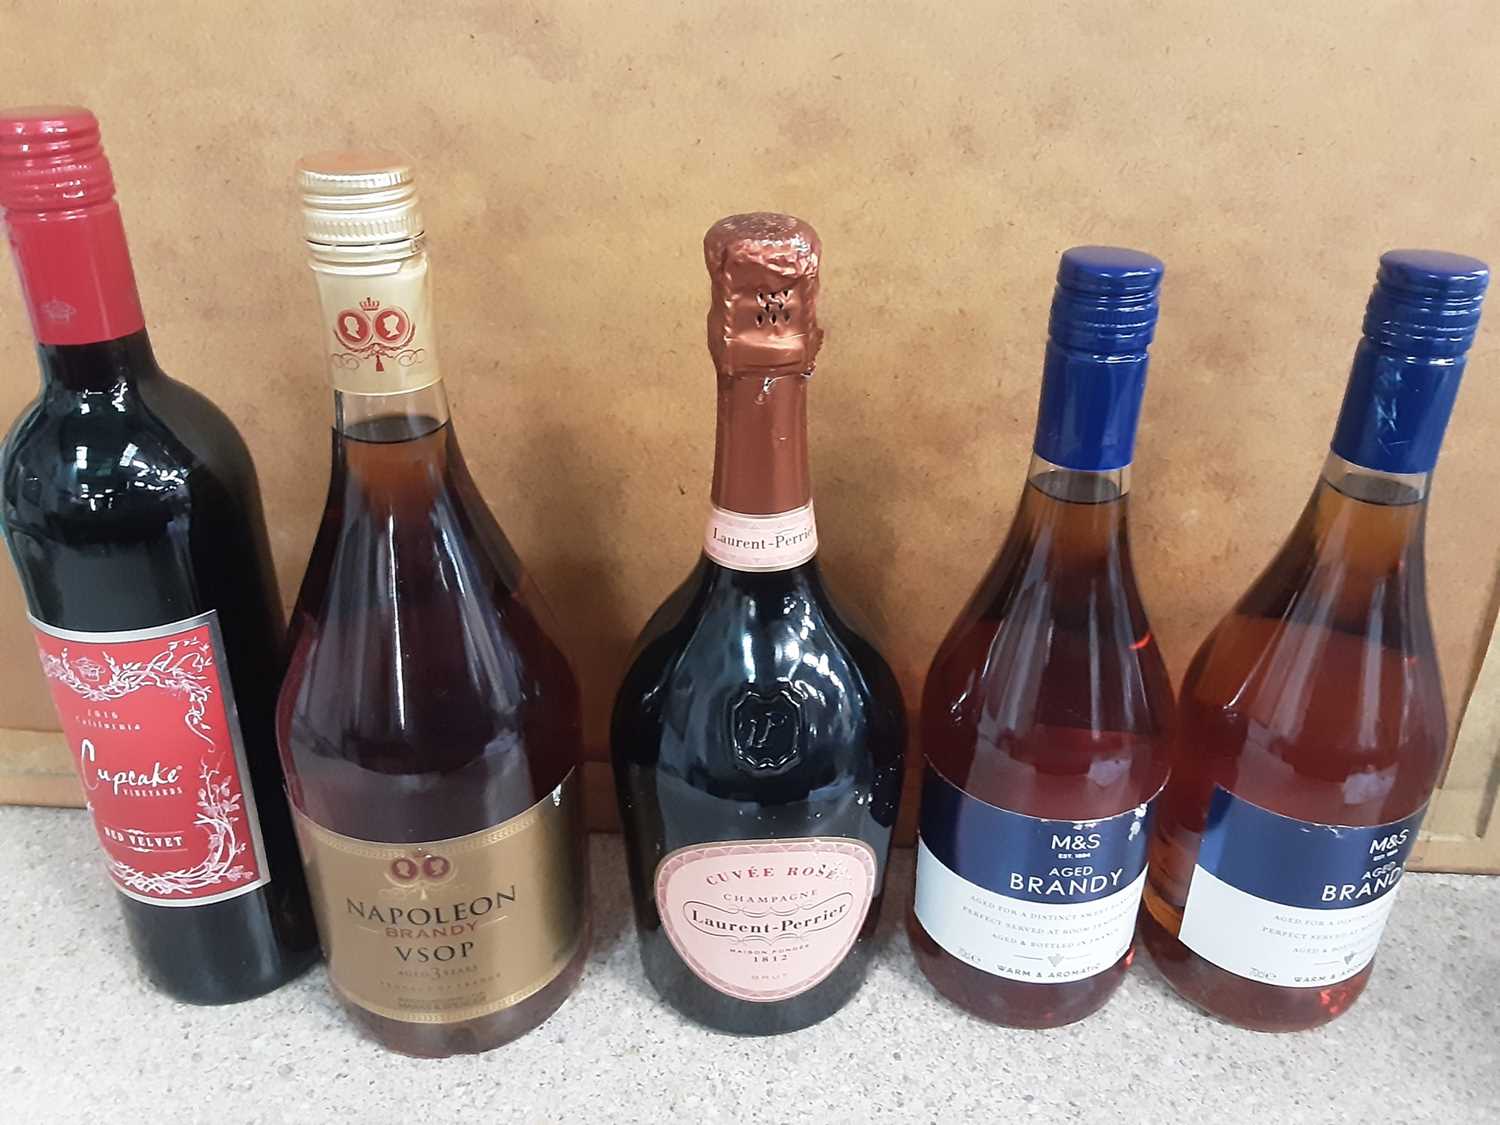 Lot 21 - Bottle of Laurent-Perrier Champagne, 1 litre bottle of Napoleon VSOP Brandy, two other bottles of brandy and a bottle of red wine (5)